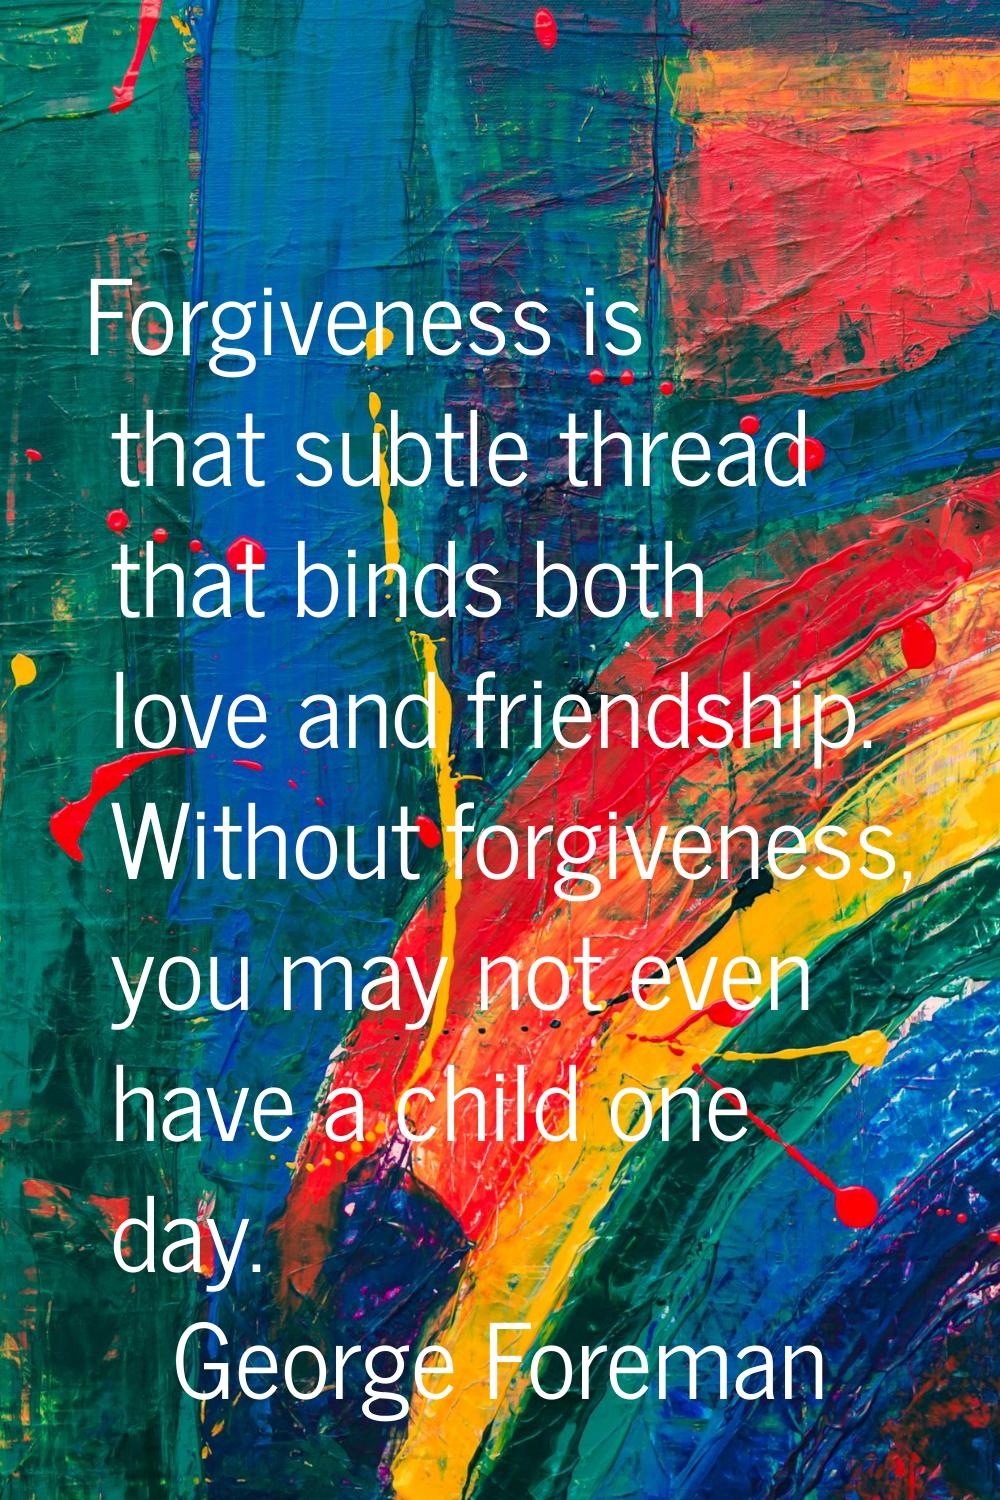 Forgiveness is that subtle thread that binds both love and friendship. Without forgiveness, you may